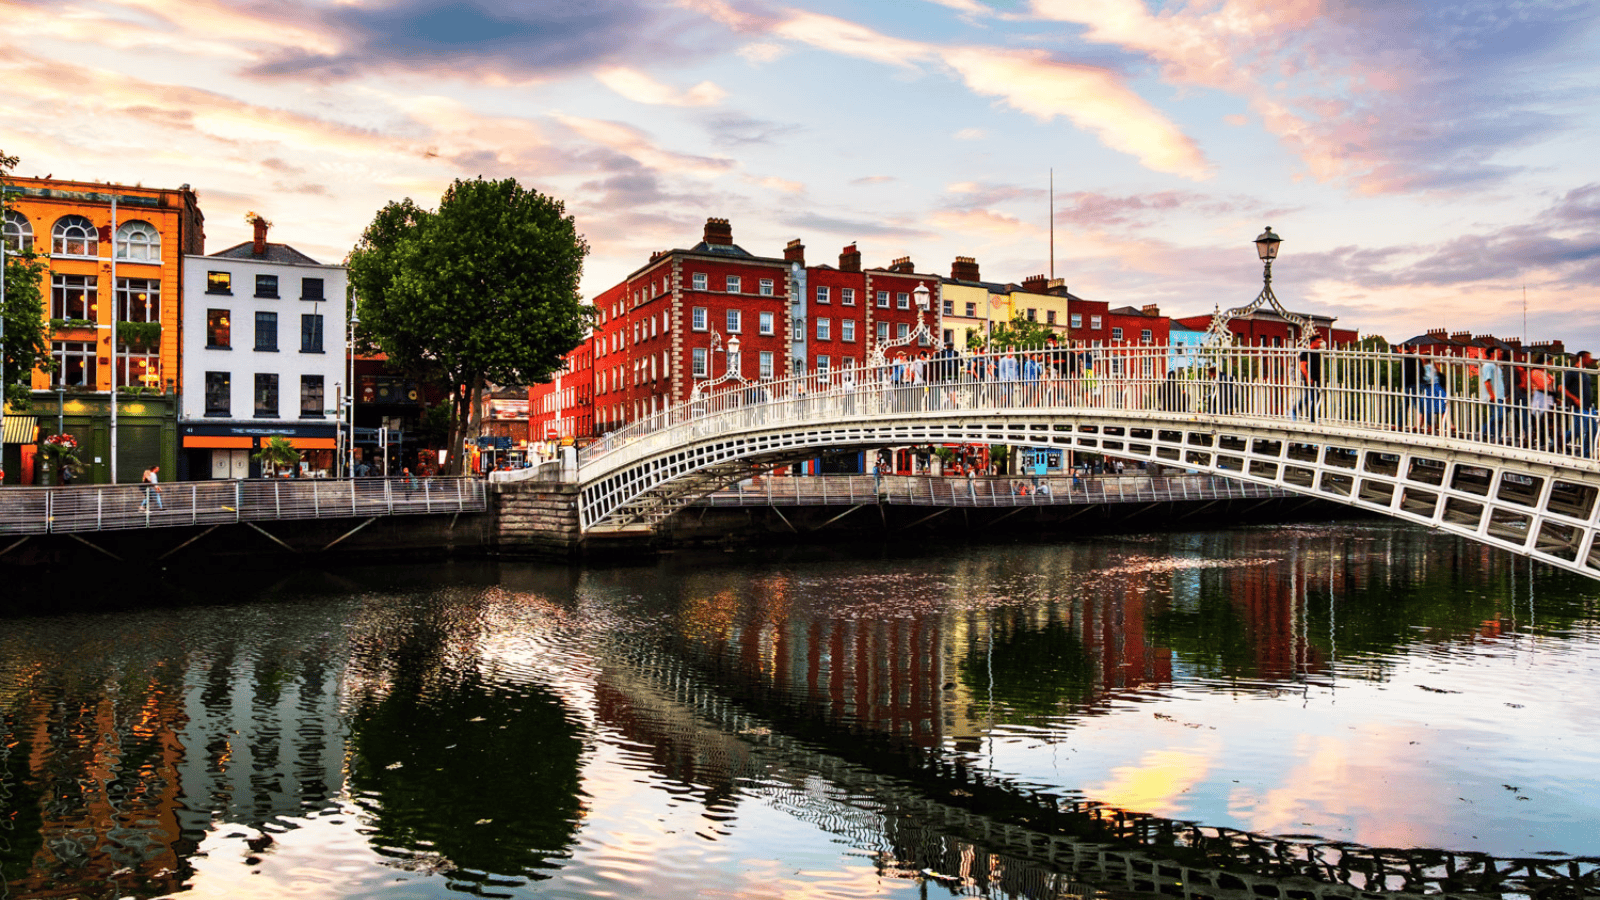 <p><a href="https://whatthefab.com/top-things-to-do-in-dublin.html" rel="follow">Dublin</a> is an underrated European city for a short trip in between flights. This vacation spot has relaxed cafes, quirky shops, and medieval ruins. Regardless if you have an afternoon or an entire day, you won’t run out of fun and unique things to do.</p>